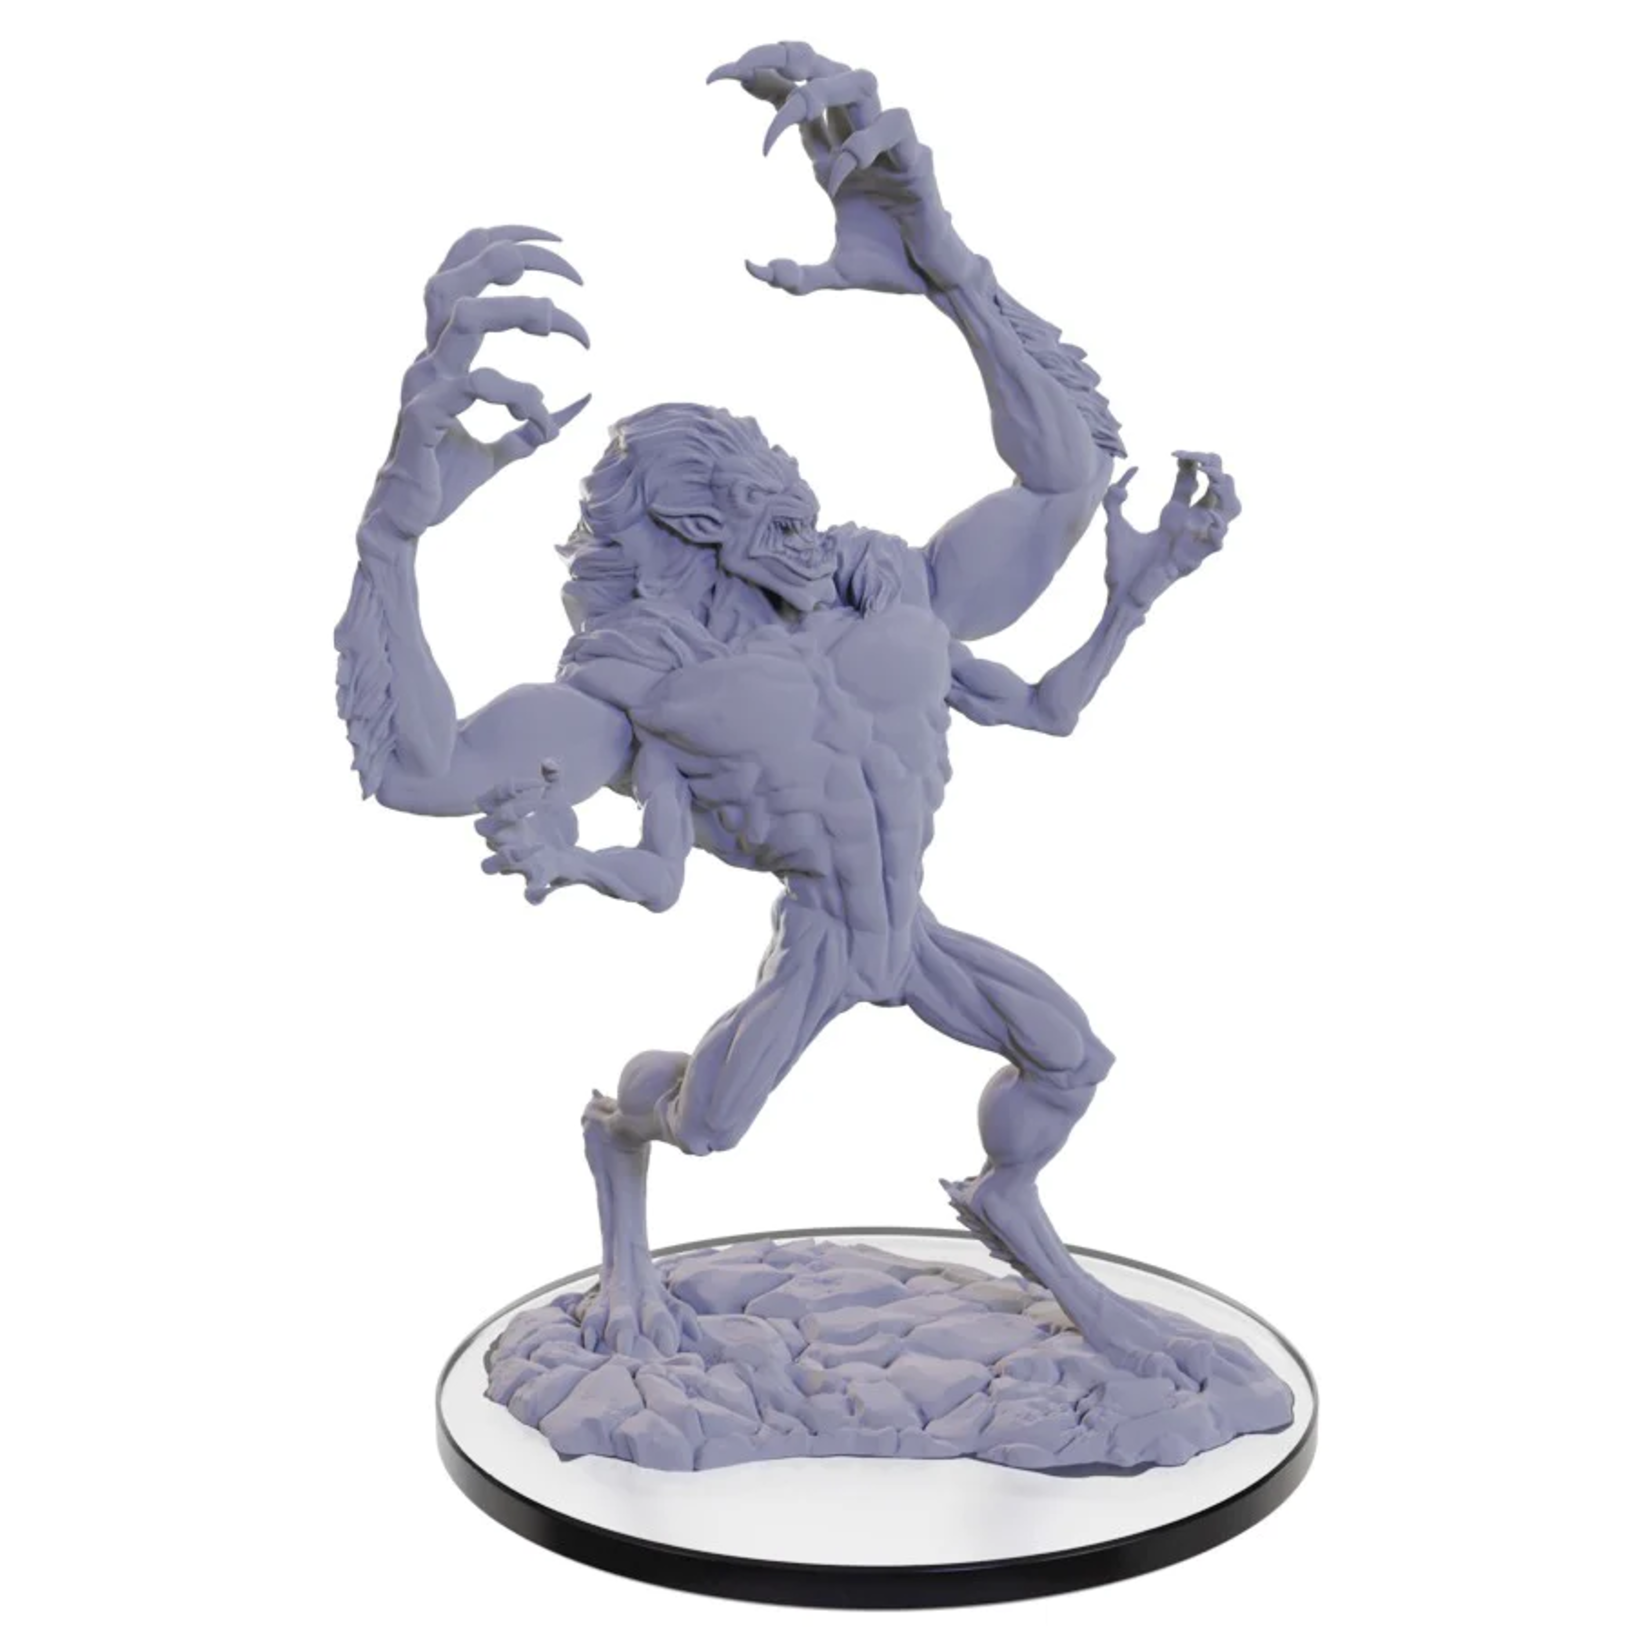 WizKids Dungeons and Dragons Nolzur's Marvelous Minis Draegloth